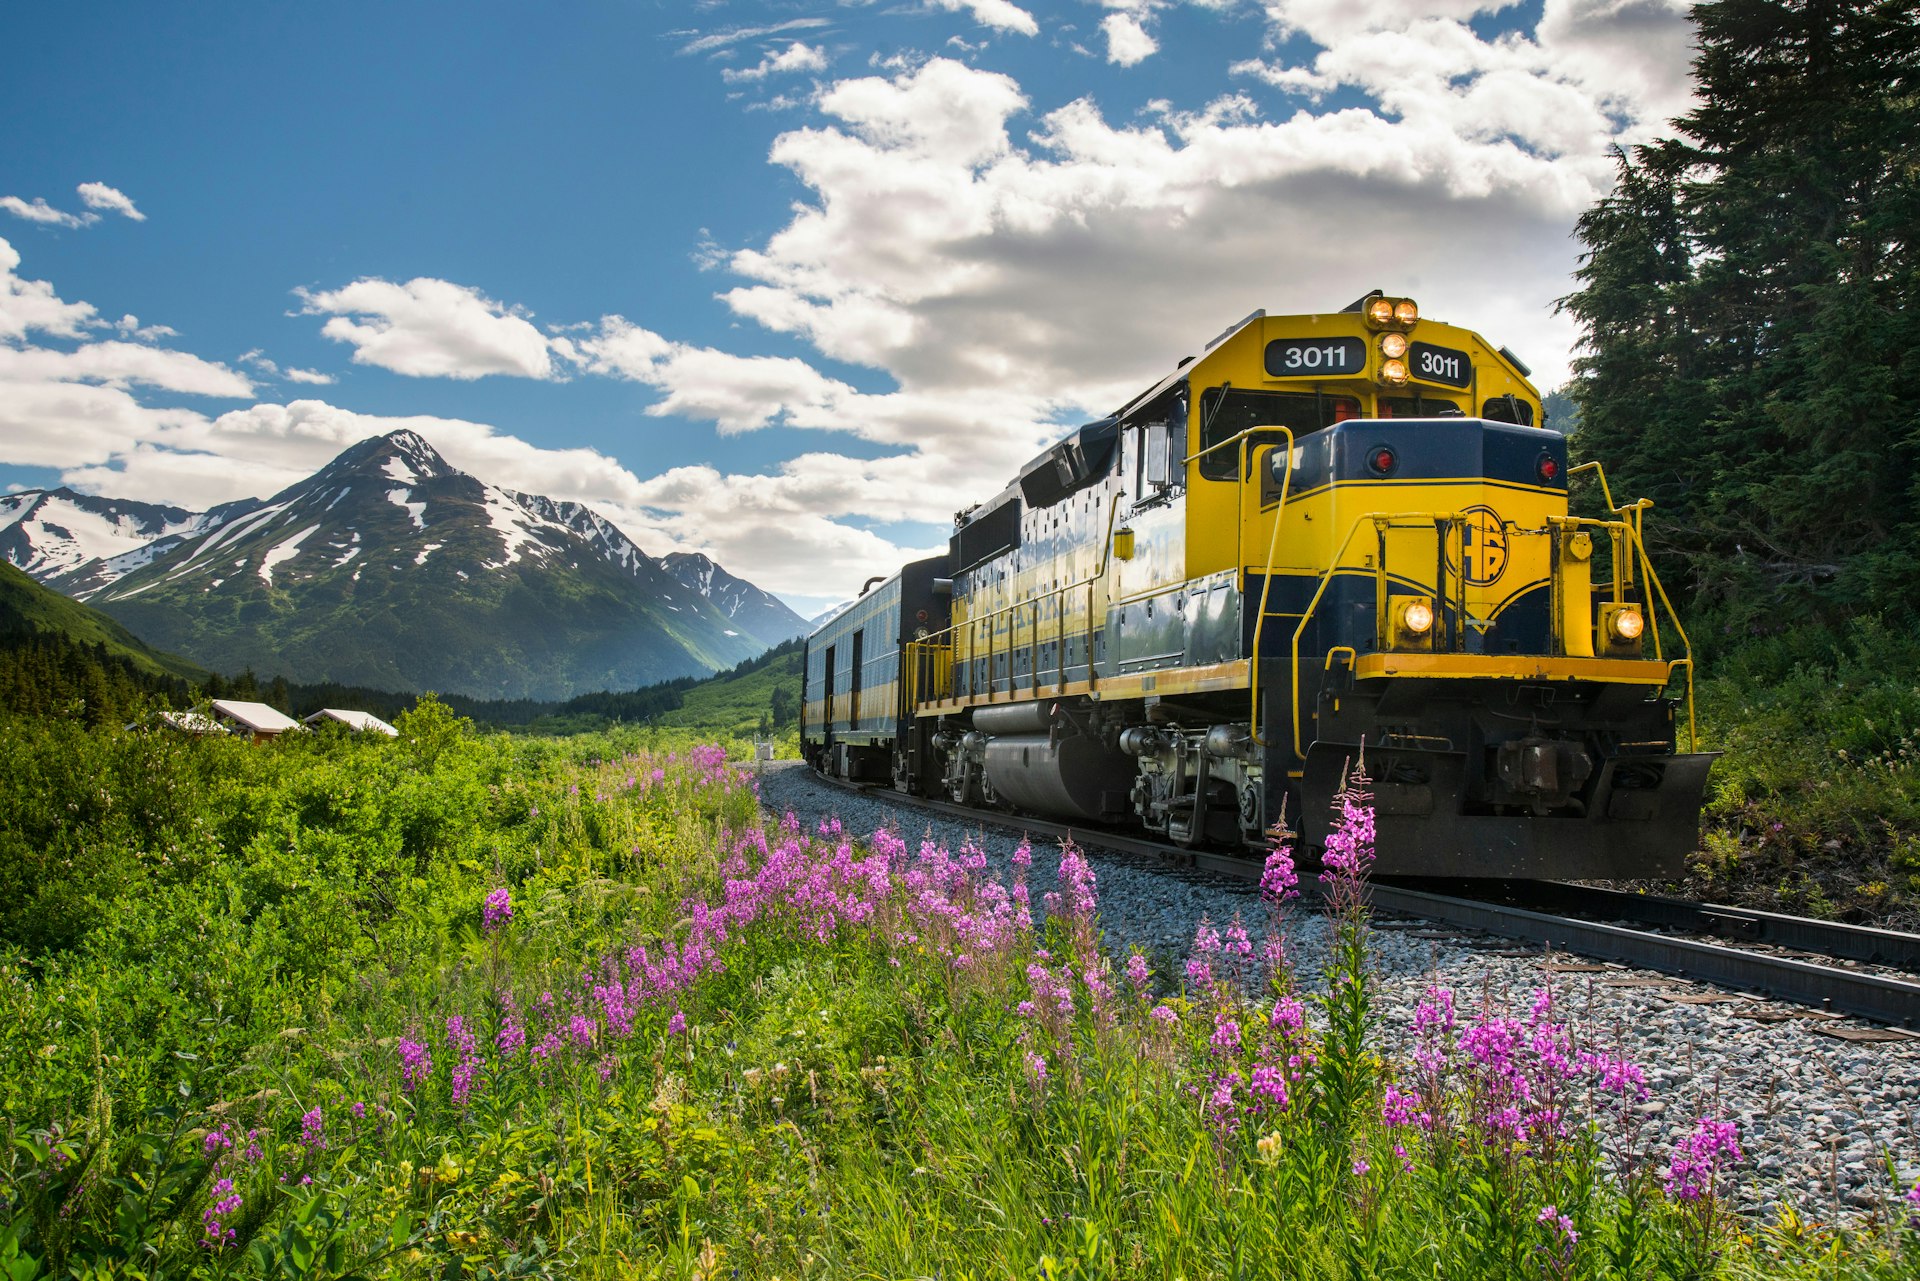 A yellow and blue train passes through a landscape with pink fireweed, with a mountain in the background